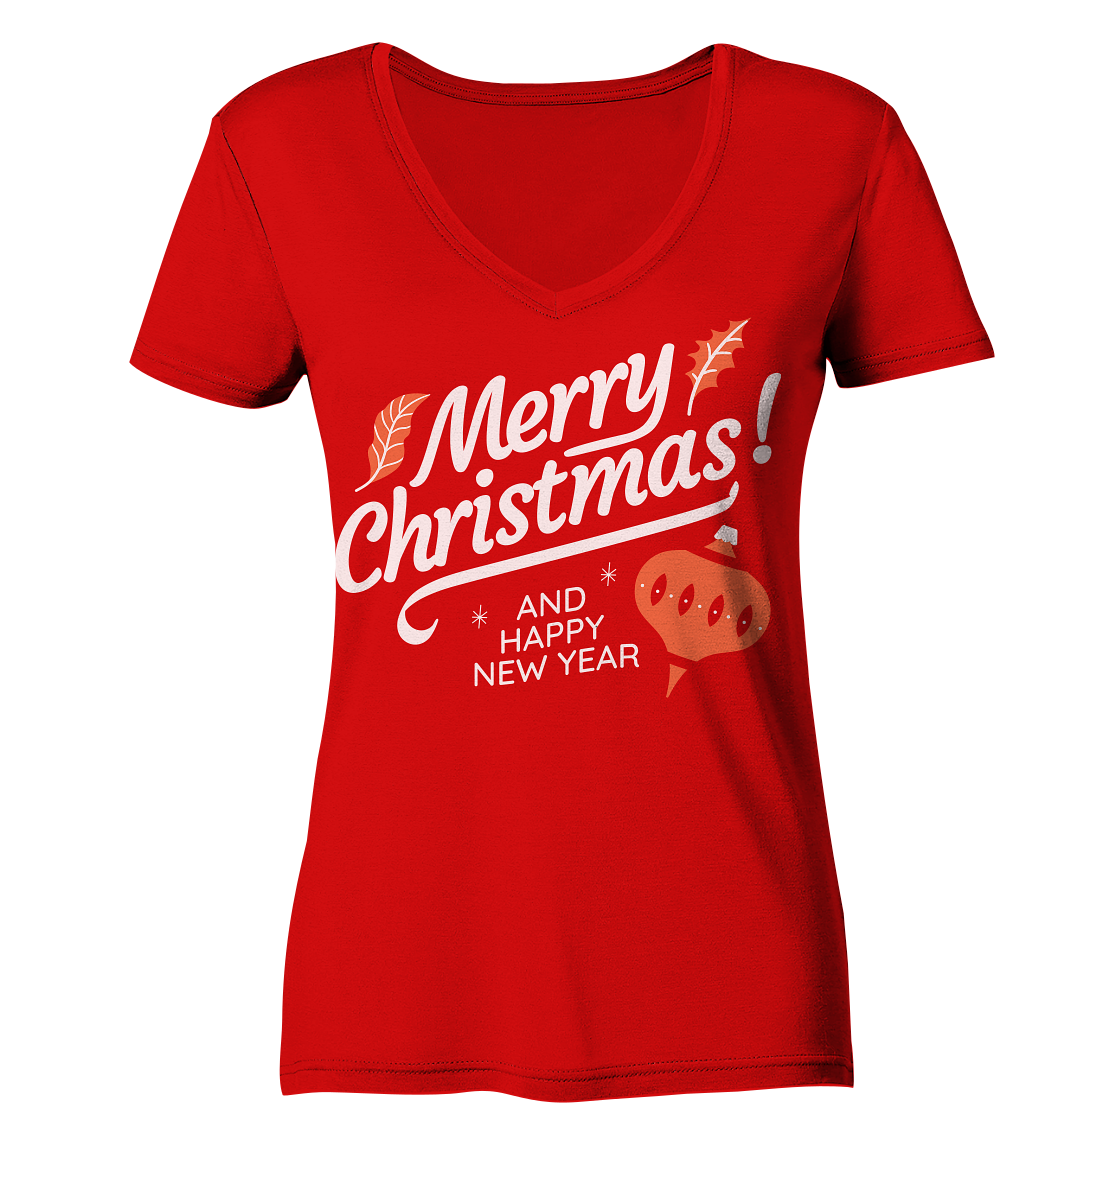 Merry Christmas and Happy New Year, Merry Christmas and Happy New Year - Ladies V-Neck Shirt